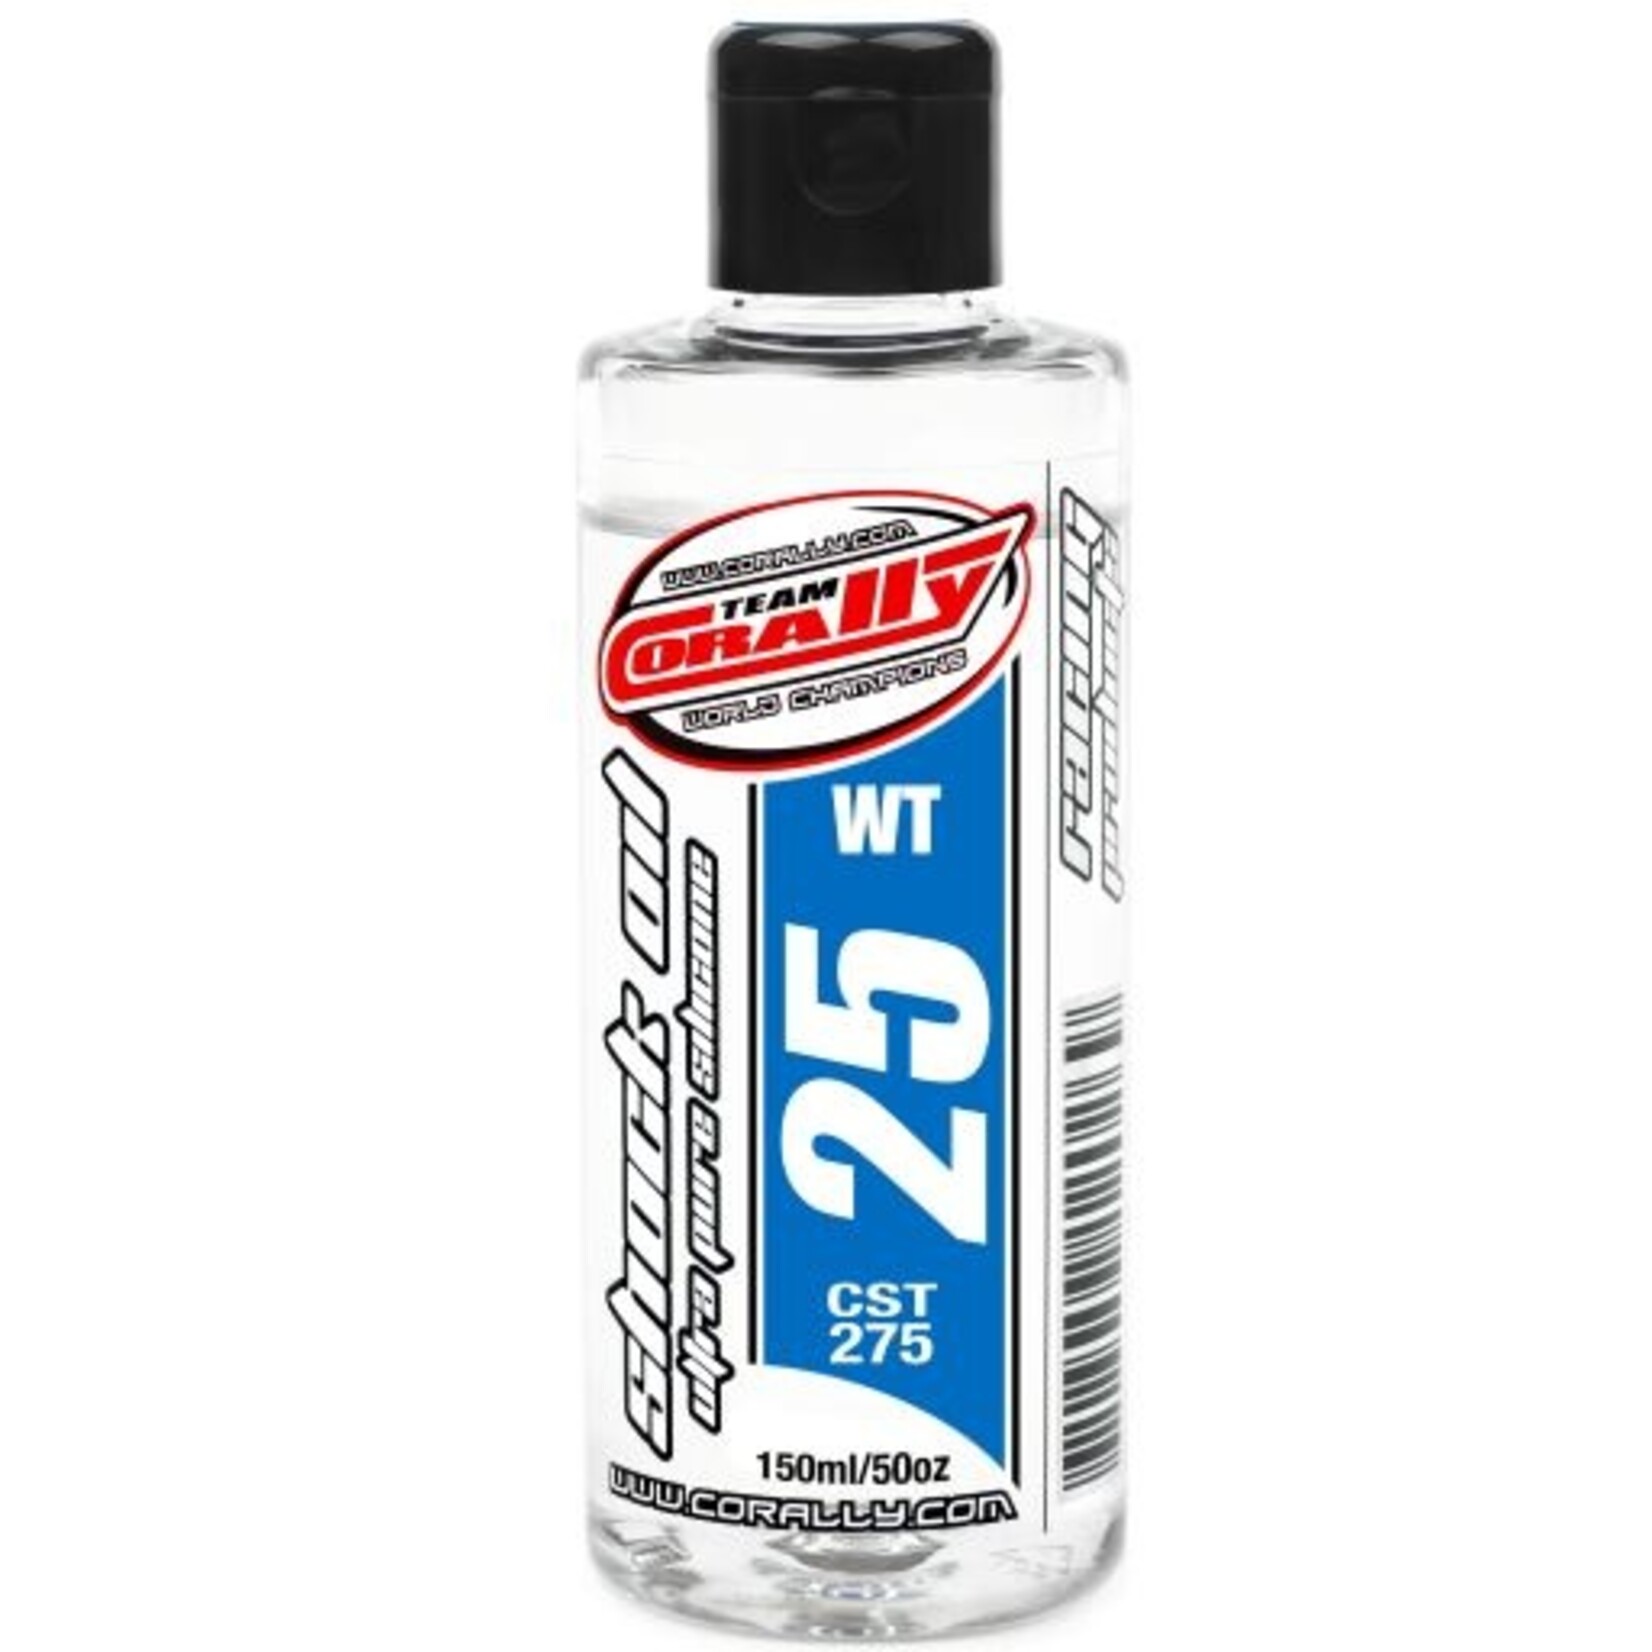 Corally (Team Corally) Ultra Pure Silicone Shock Oil - 25 WT - 150ml